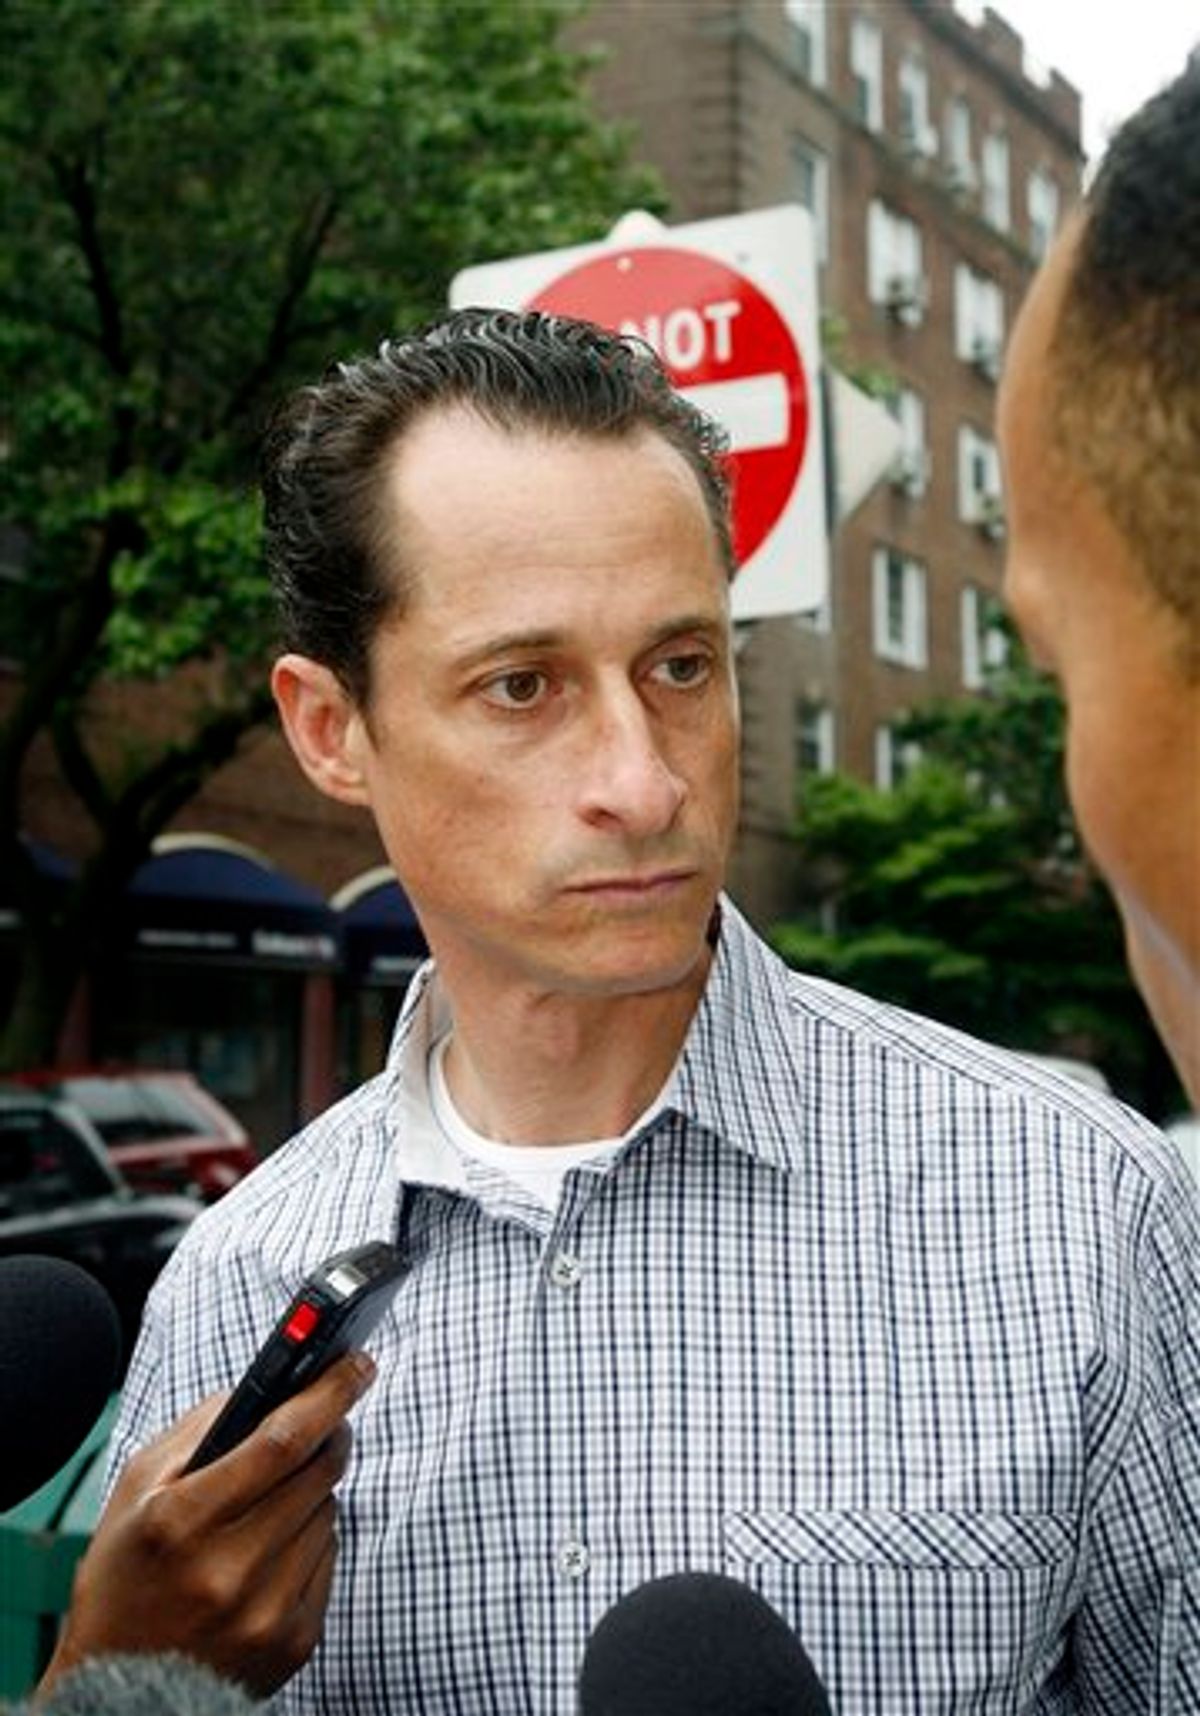 Rep. Anthony Weiner, D-N.Y., answers questions from the media as he carries his laundry to a laundromat near his home in the Queens borough of New York, Saturday, June  11, 2011. The 46-year-old congressman acknowledged Friday that he had online contact with a 17-year-old girl from Delaware but said there was nothing inappropriate. (AP Photo/David Karp) (AP)